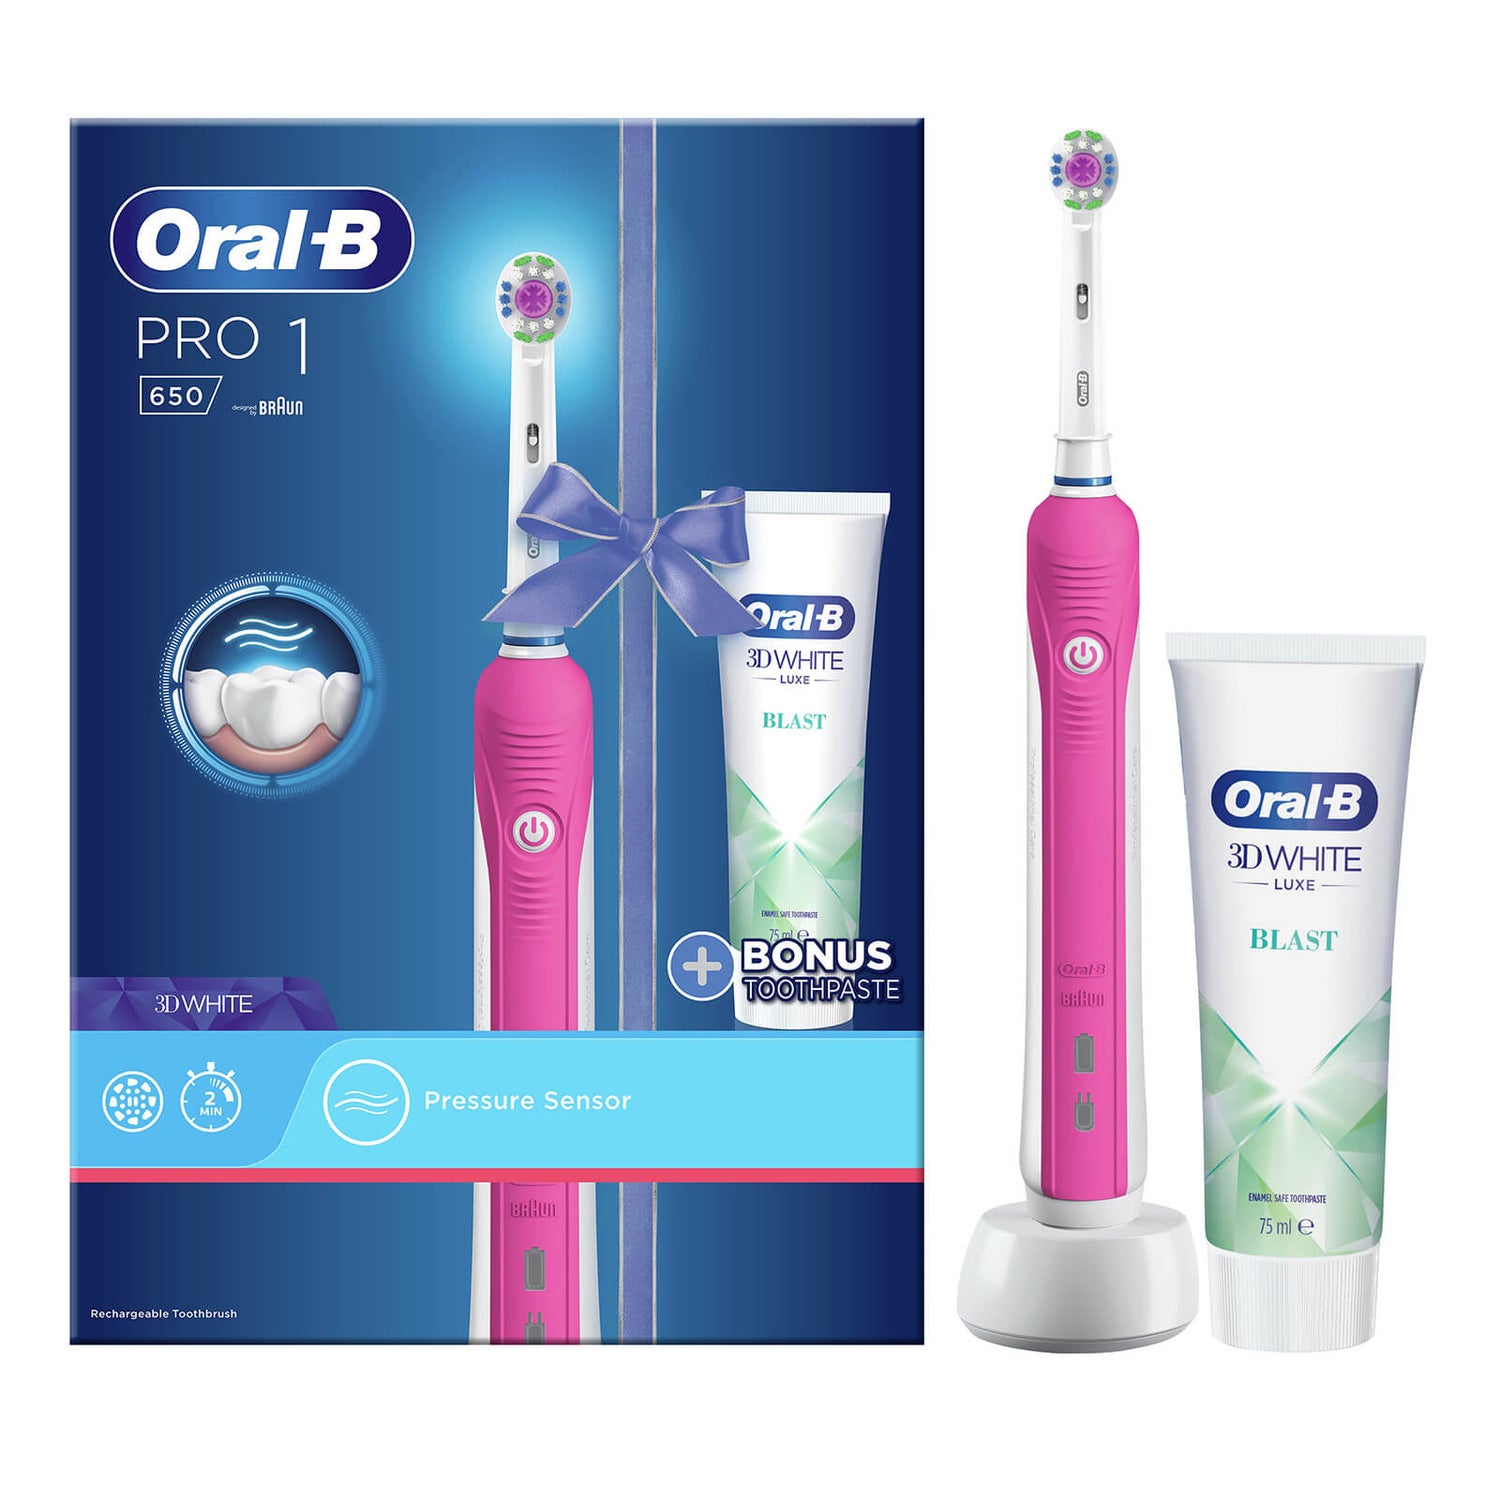 Oral B Pro 1 650 Electric Toothbrush and Toothpaste - Pink